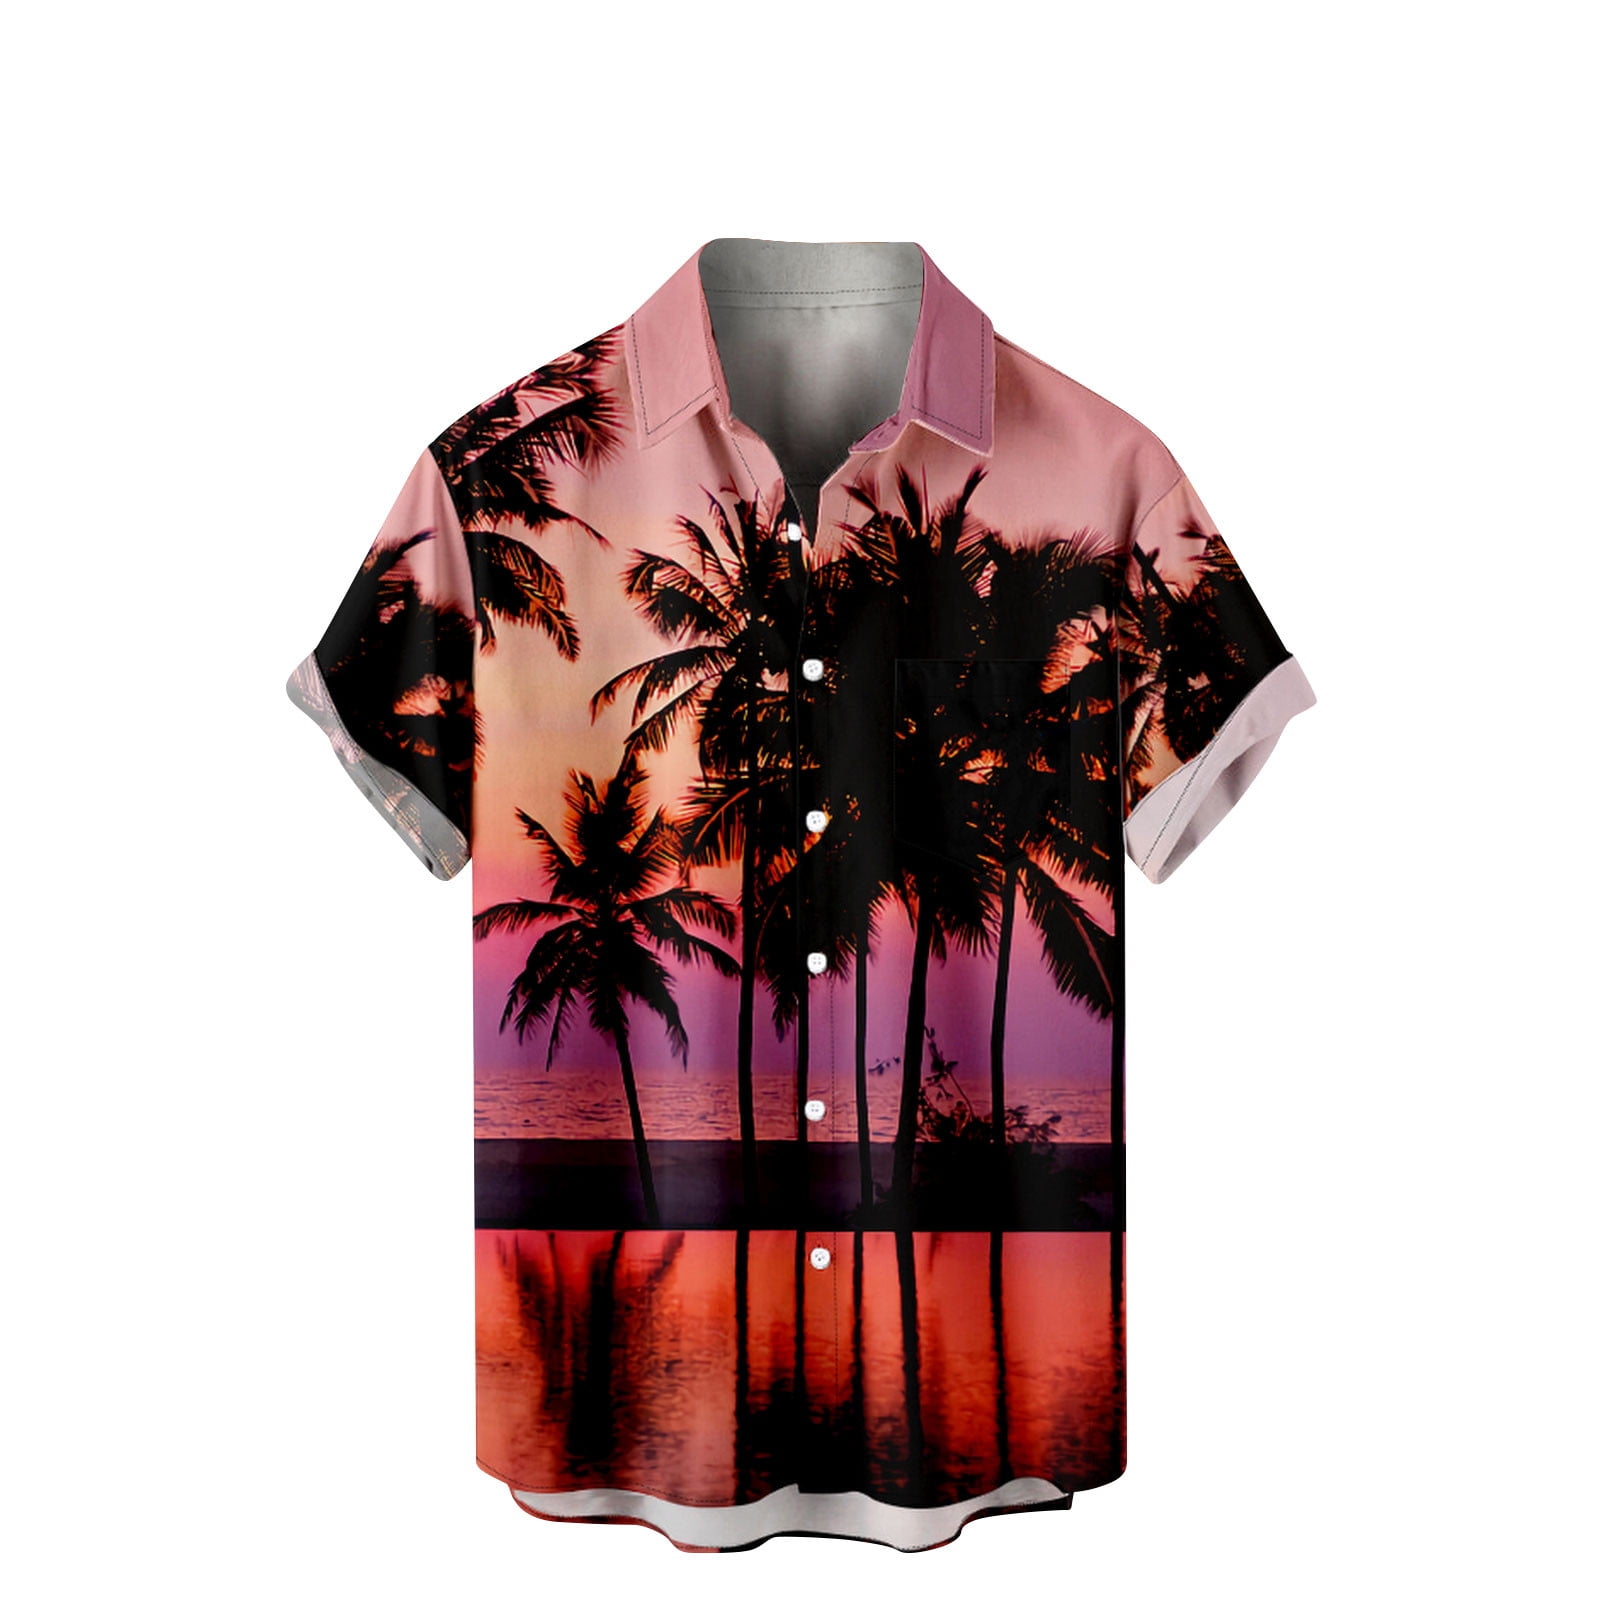 VSSSJ Hawaiian Style Shirts for Men Relaxed Fit Colorful Striped